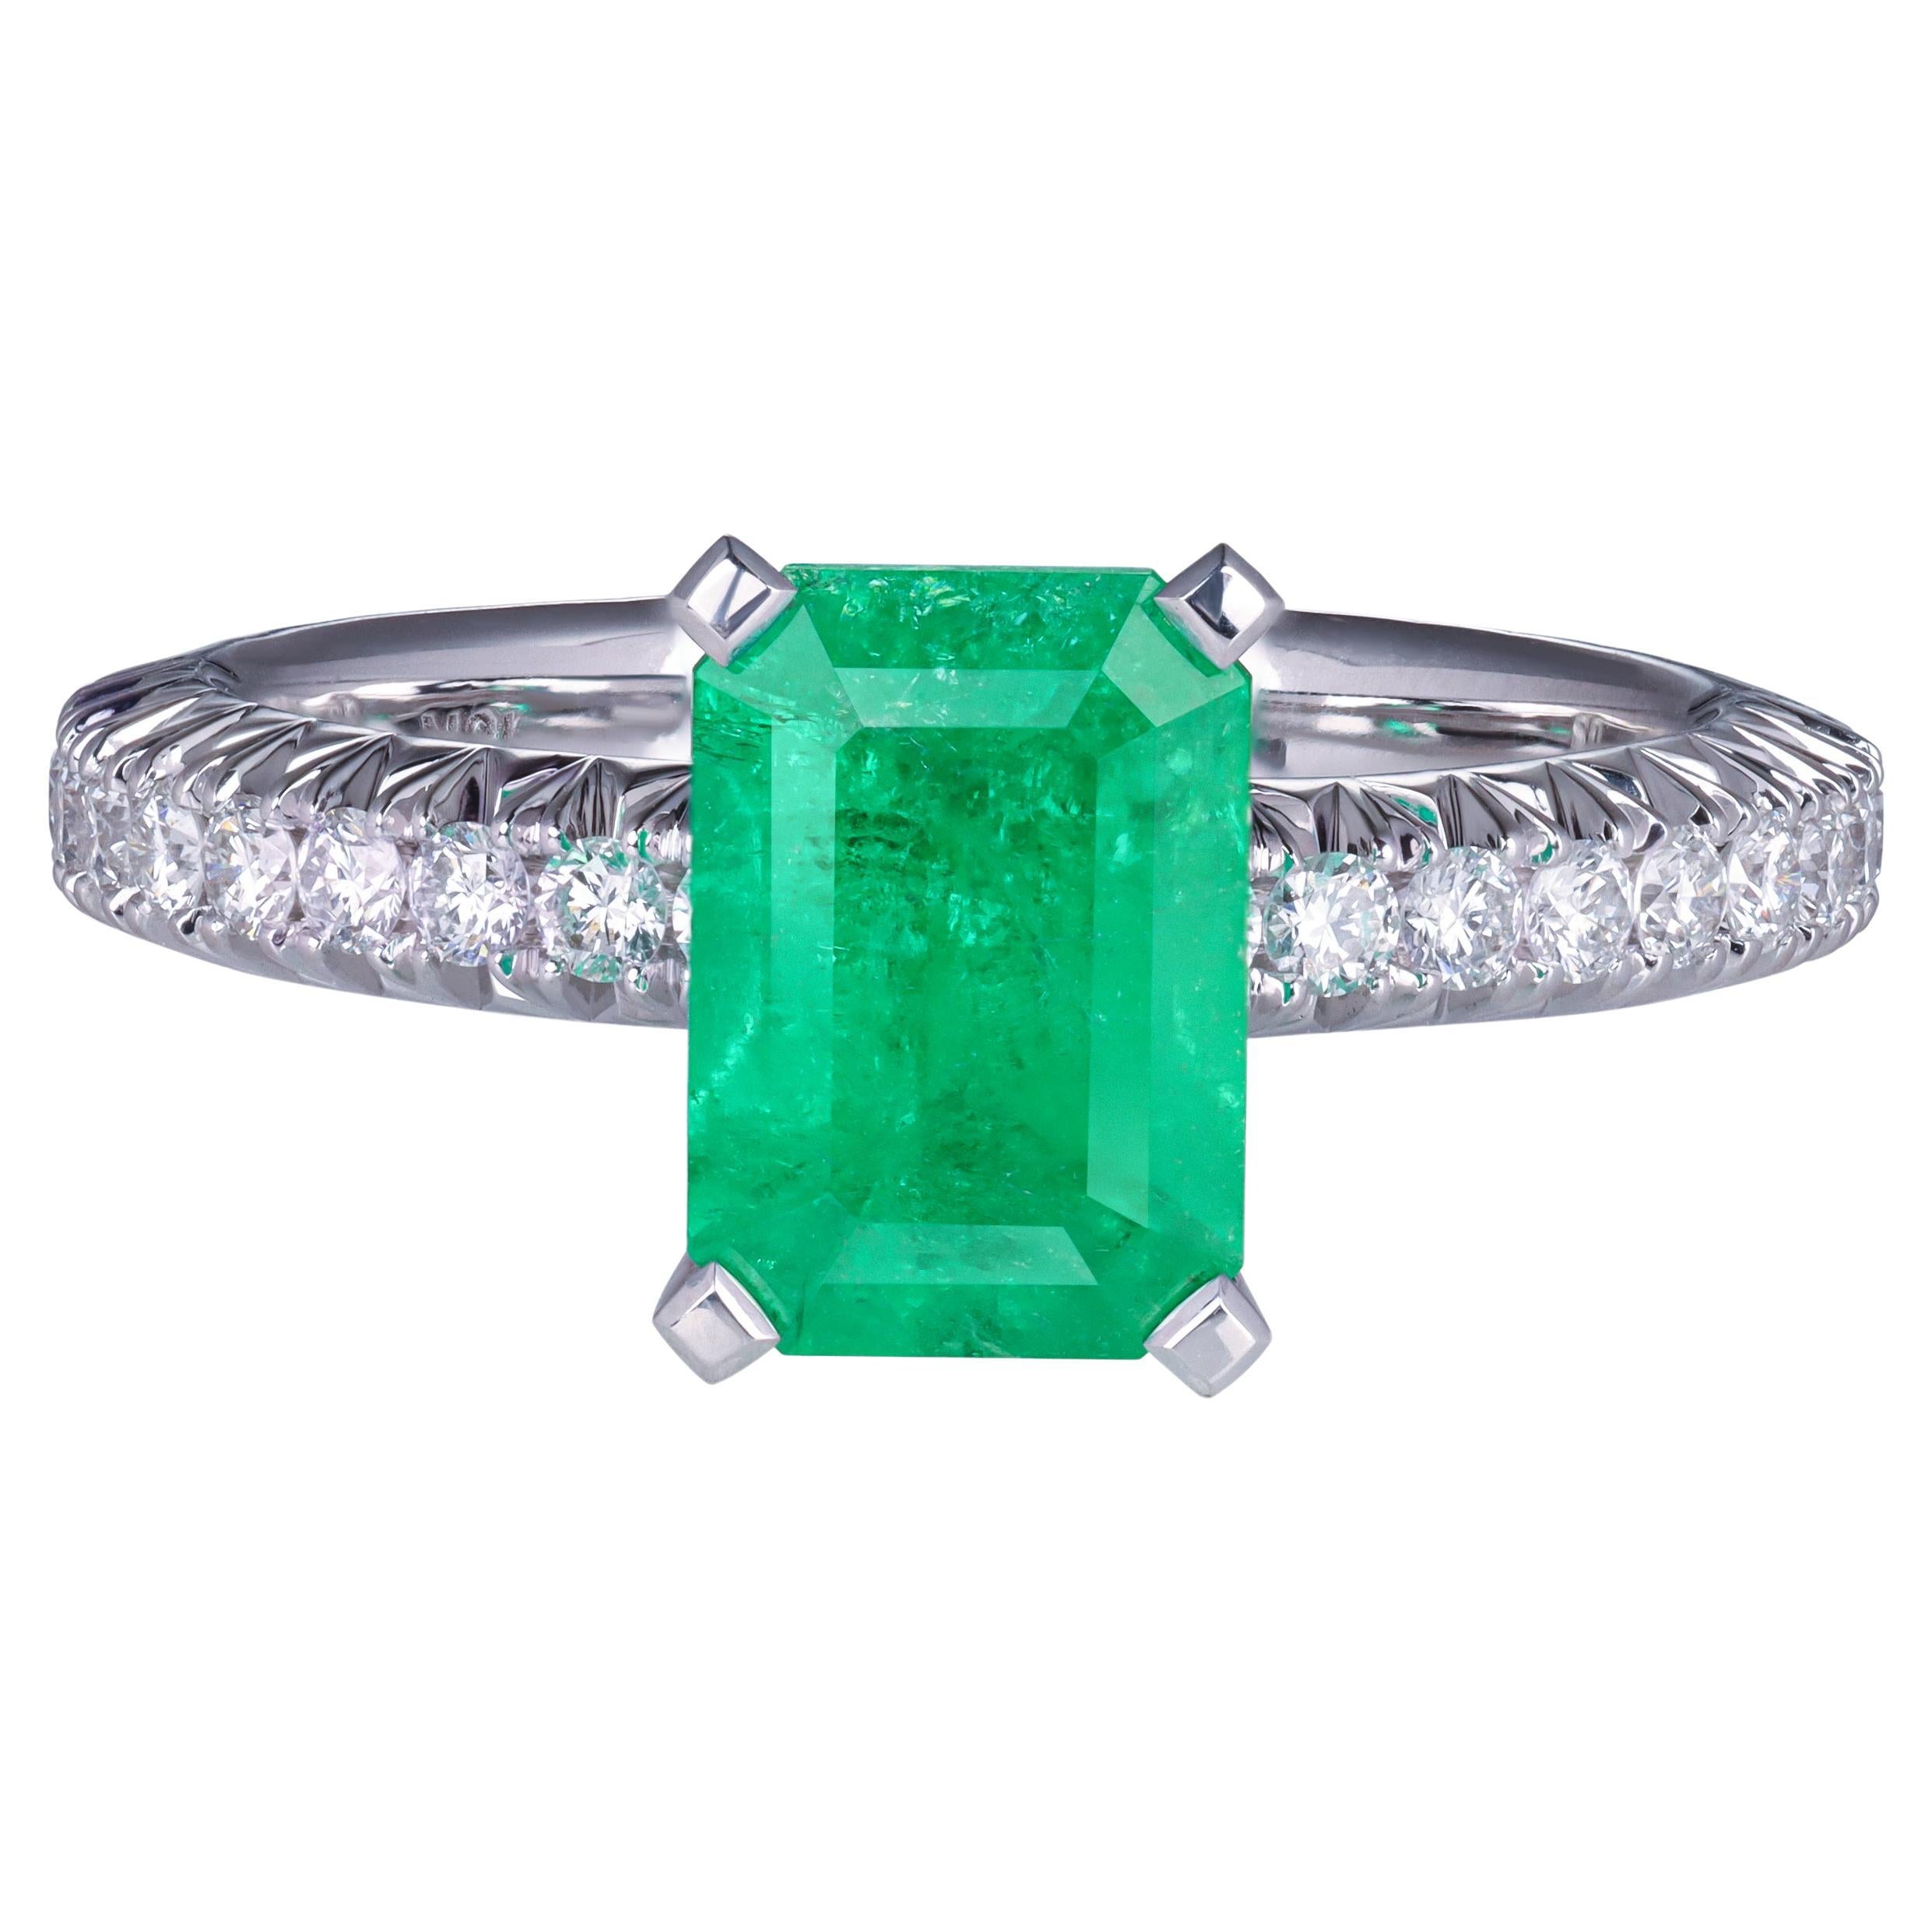 Vivid Green Colombian Emerald 1.71 ct Ring with Diamonds in 18K white gold